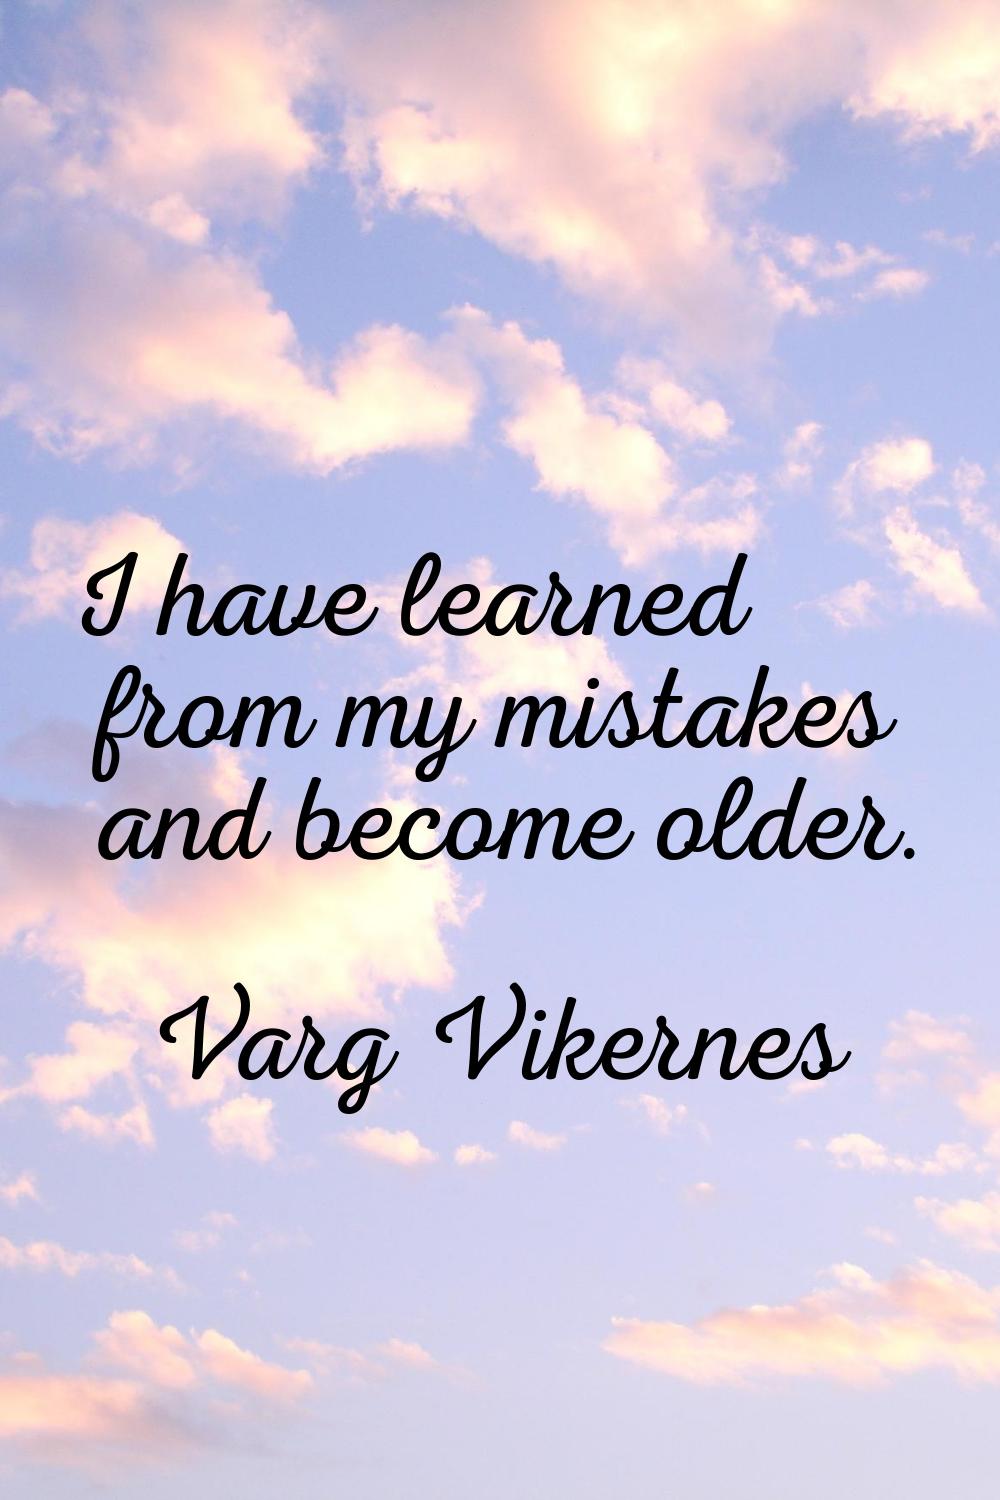 I have learned from my mistakes and become older.